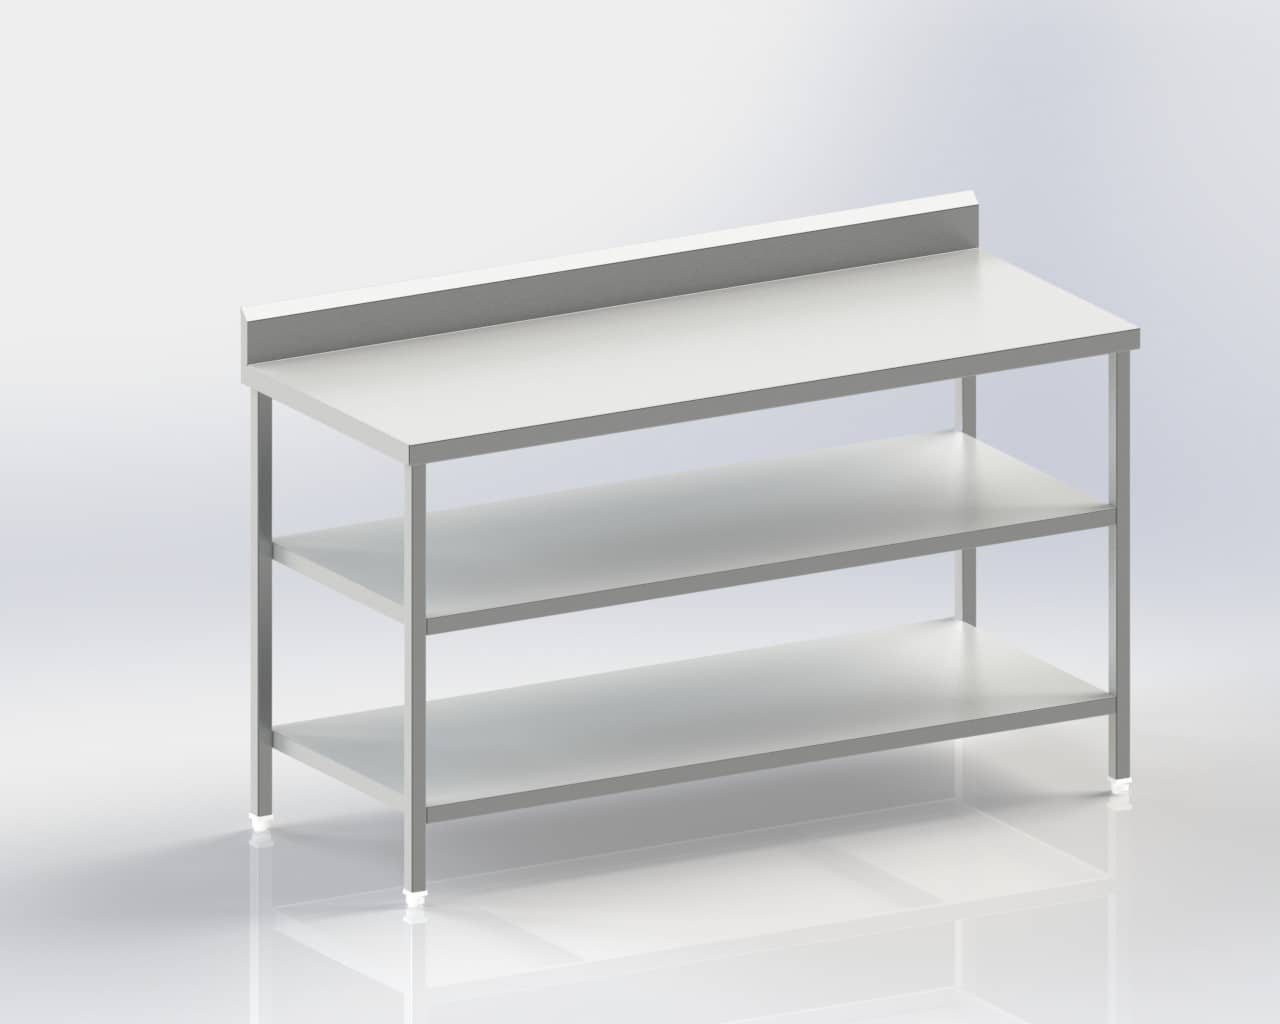 Mobile Table with Lower and Intermediate Shelves